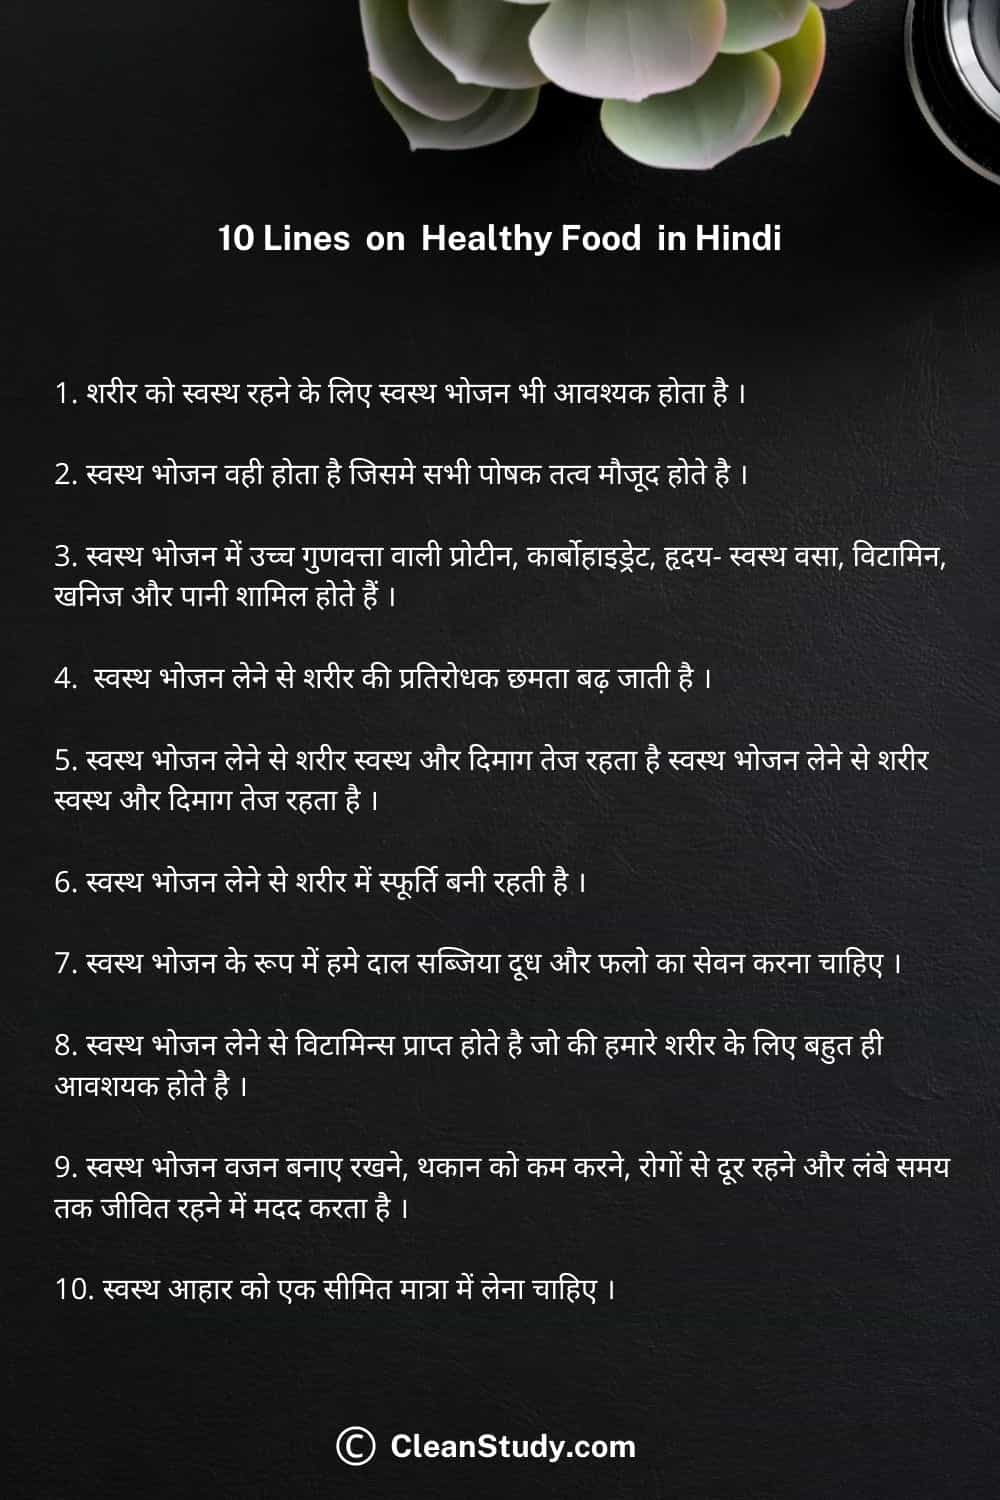 10 lines on healthy food in hindi